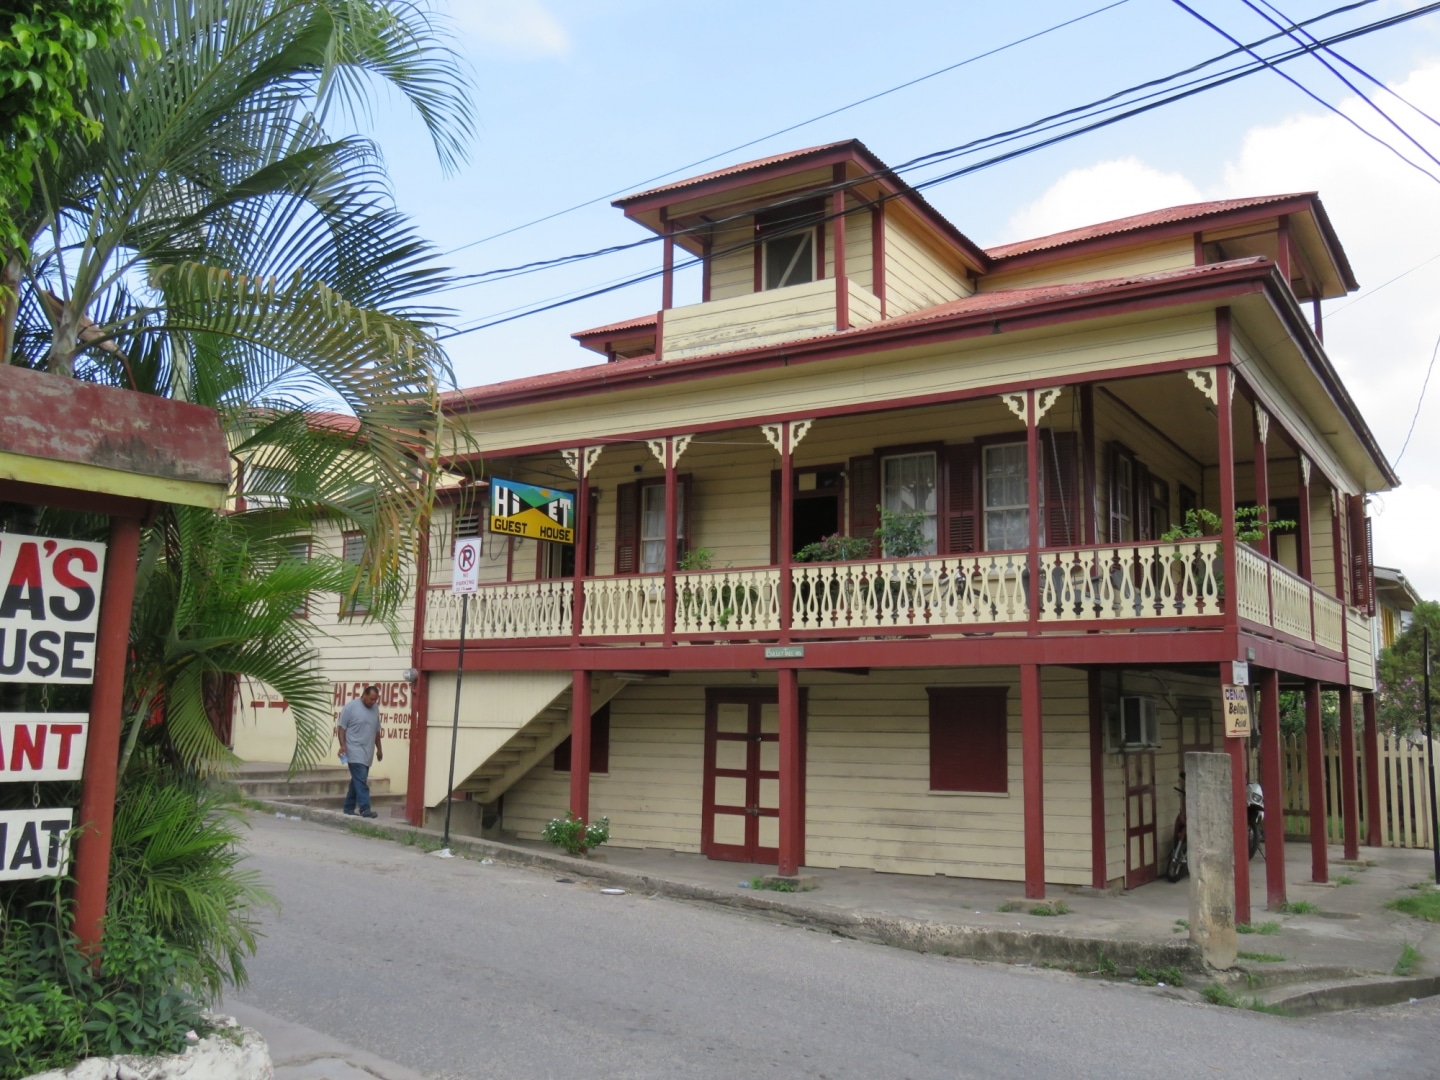 San Ignacio, Cayo, Belize:  The Changes, The Restaurants and My Guesthouse